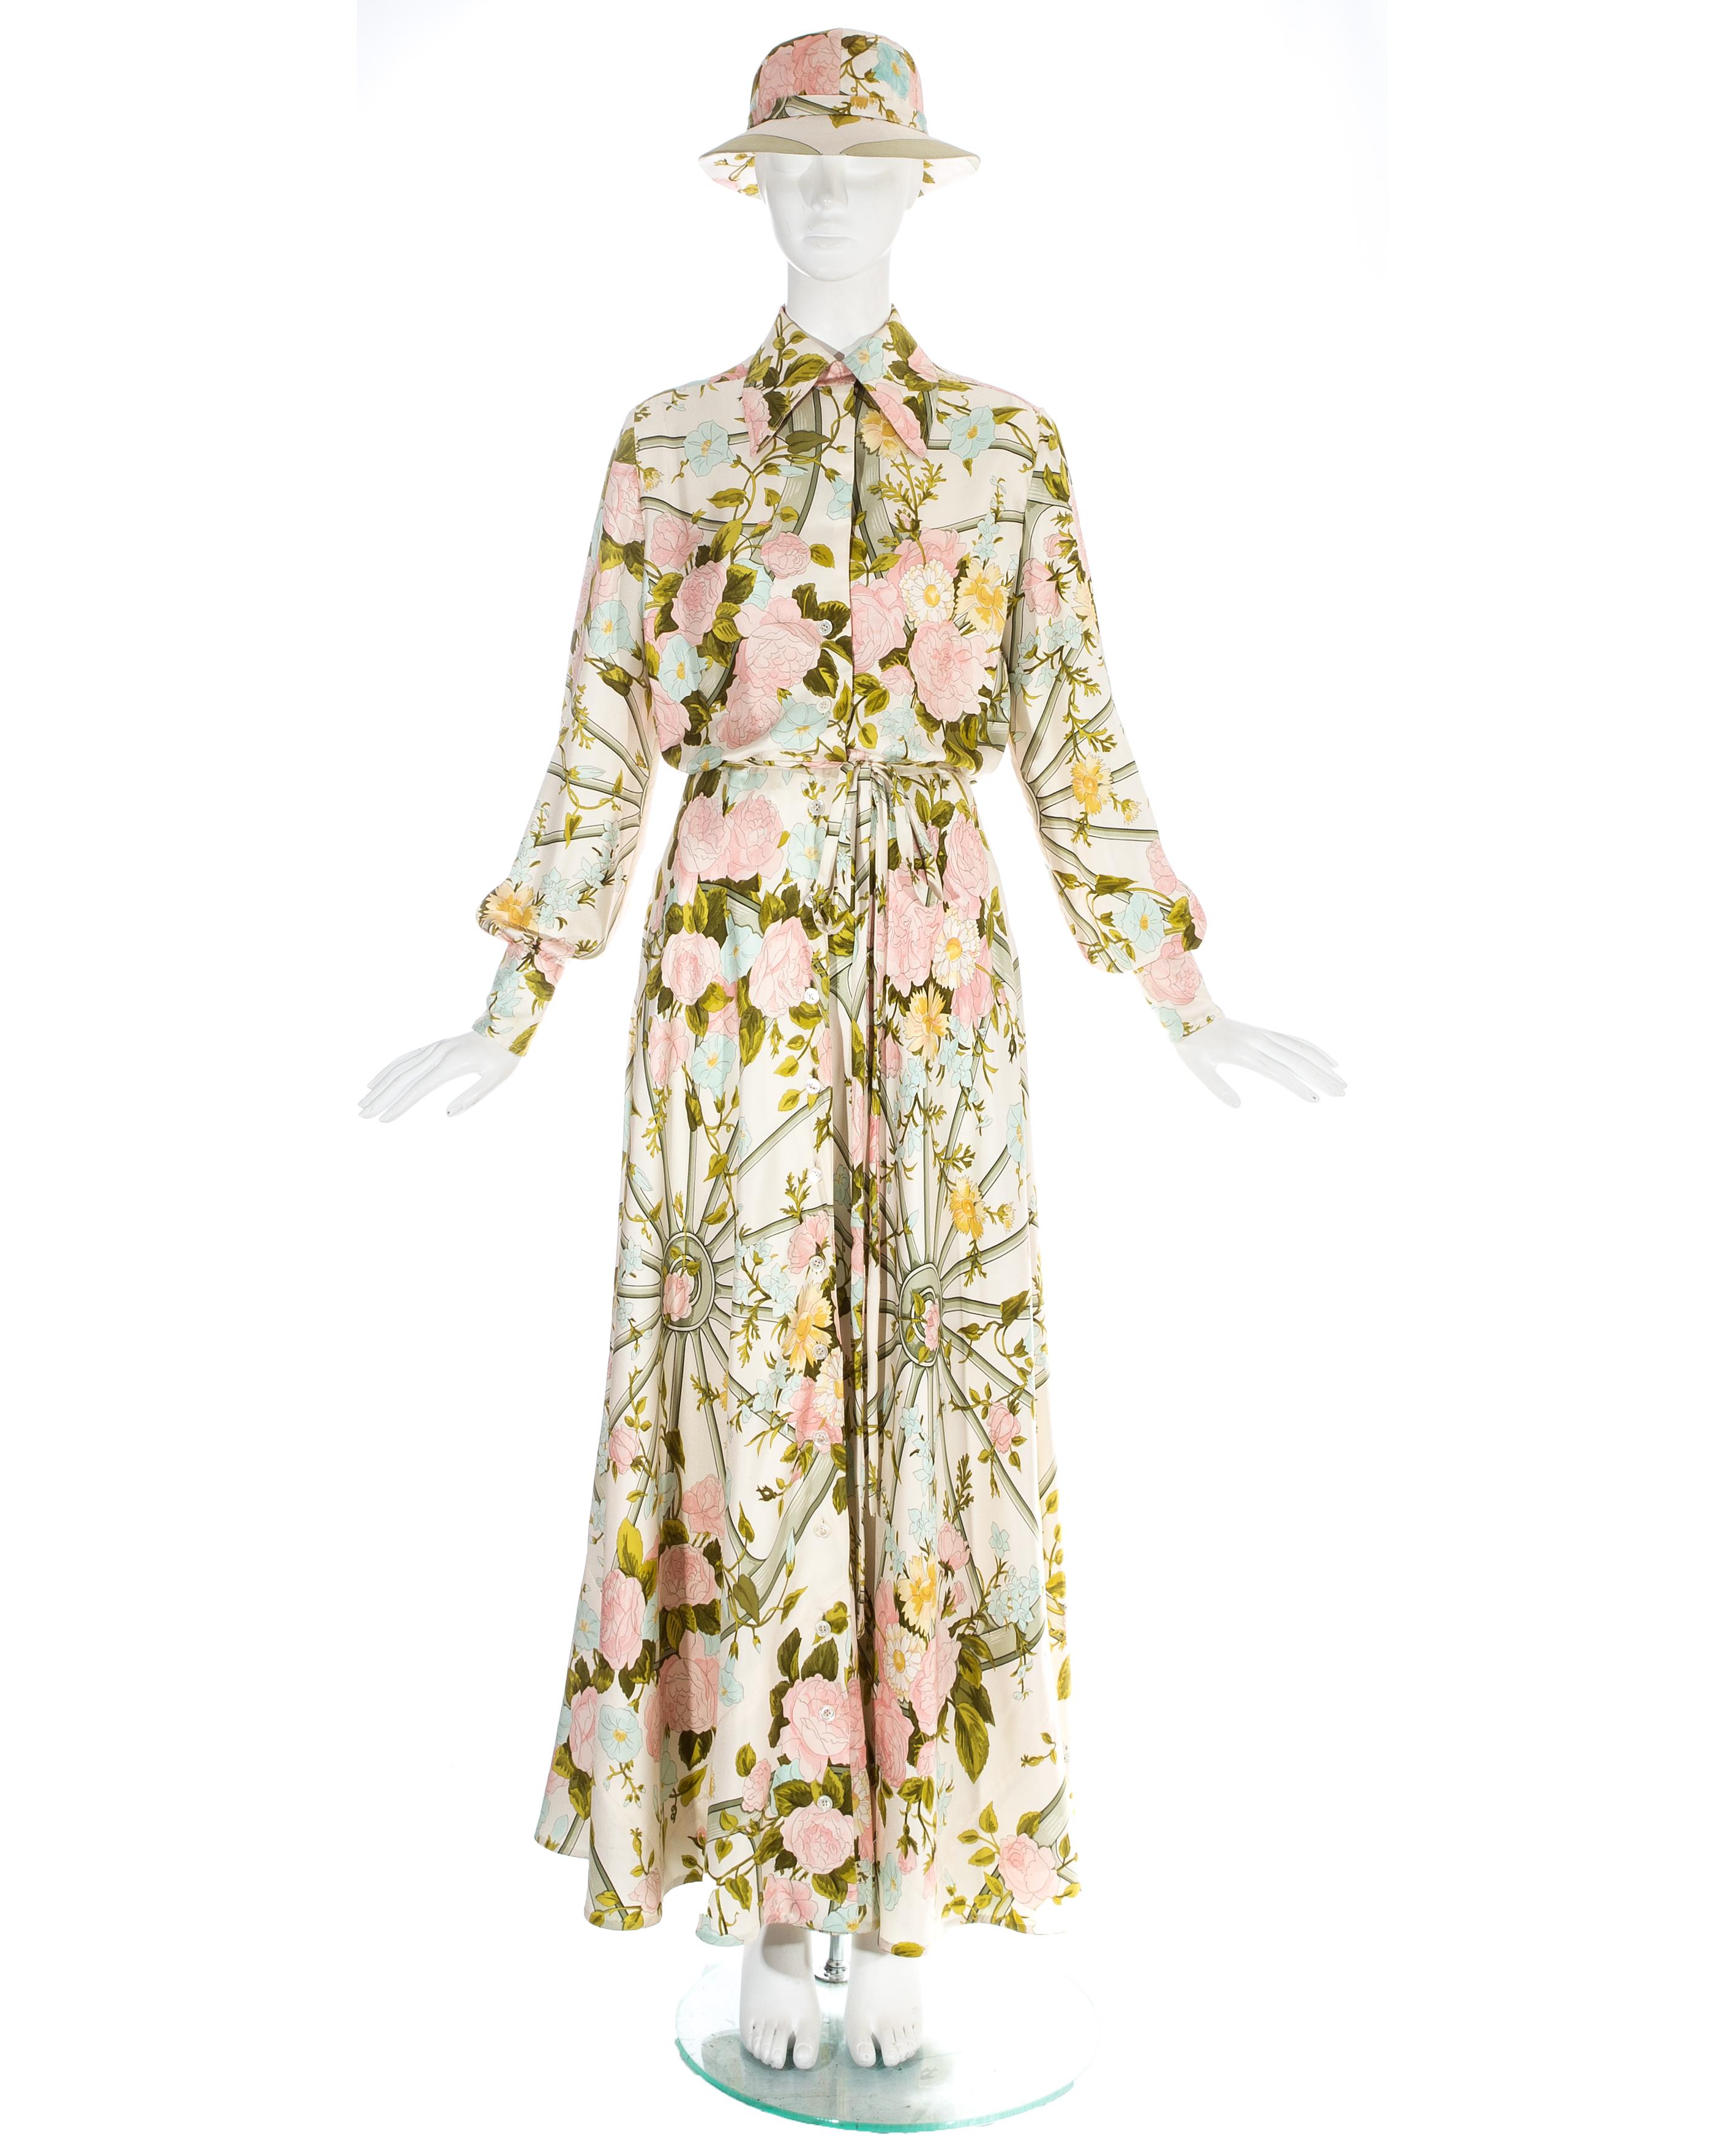 Silk floral maxi shirt dress with matching sunhat

- Button fastenings throughout  
- Bishop sleeves 
- Internal waist stay  
- 'Romantique' floral print

c. 1970s